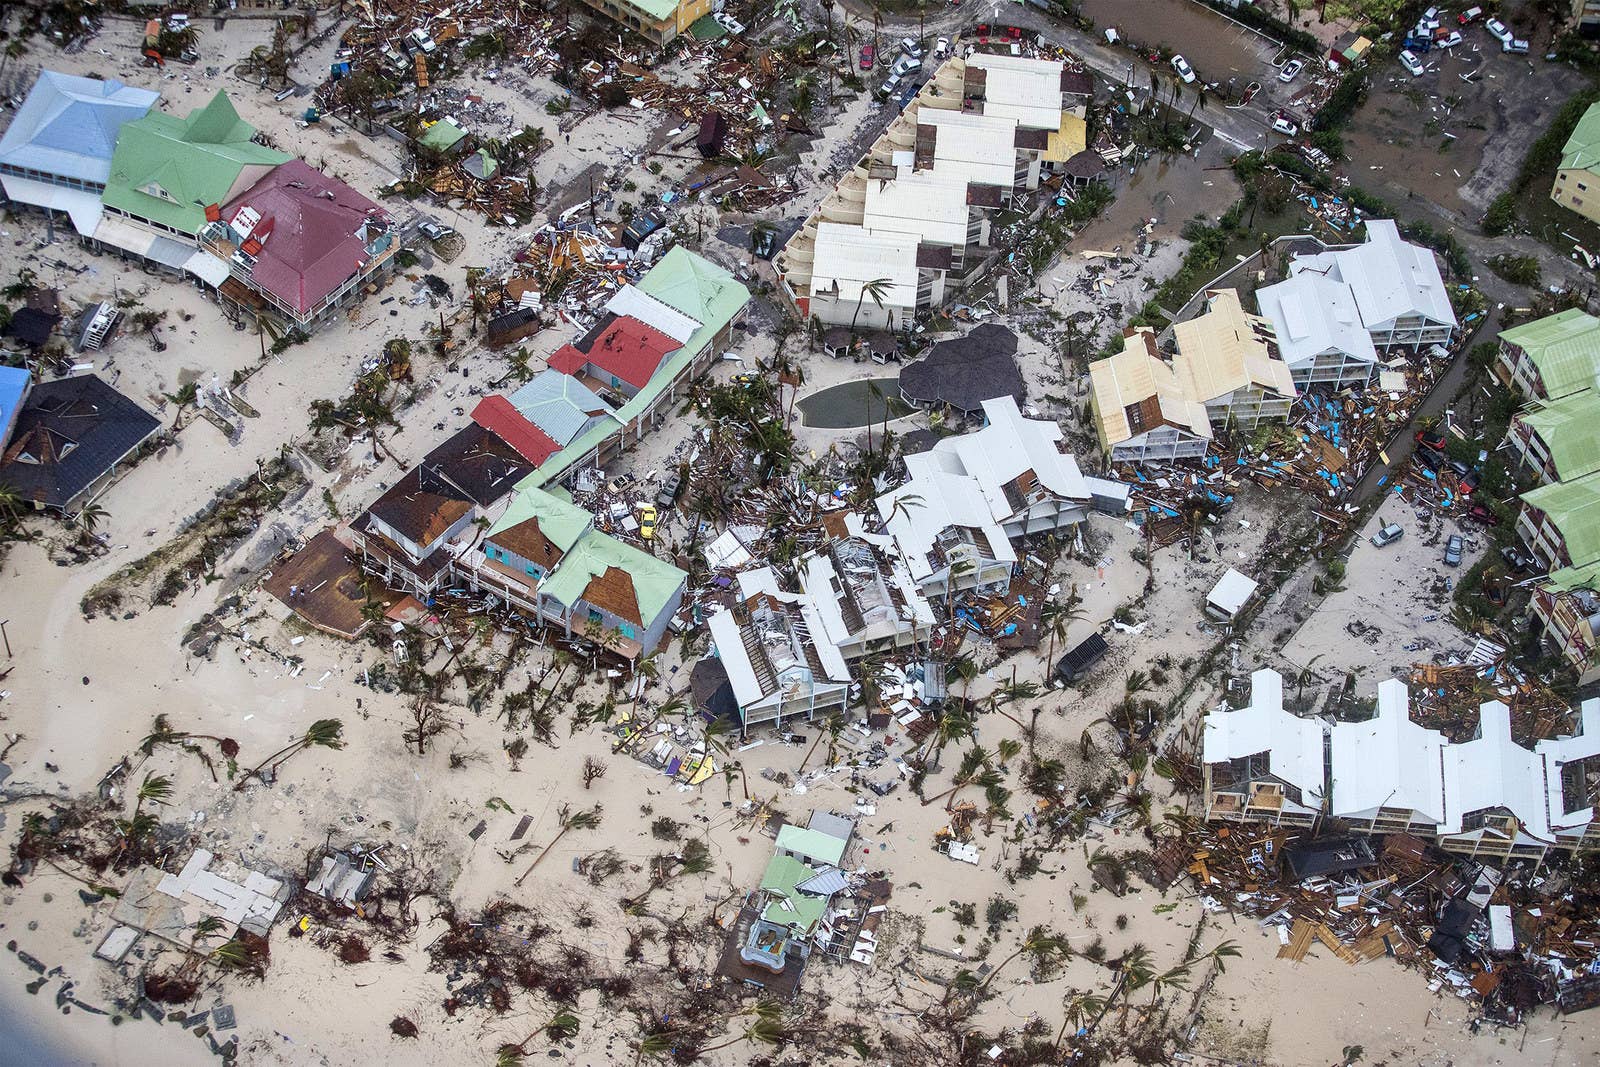 An aerial photograph taken and released by the Dutch department of Defense on Wednesday shows the damage of Hurricane Irma in Philipsburg on the Dutch Caribbean territory of Sint Maarten.